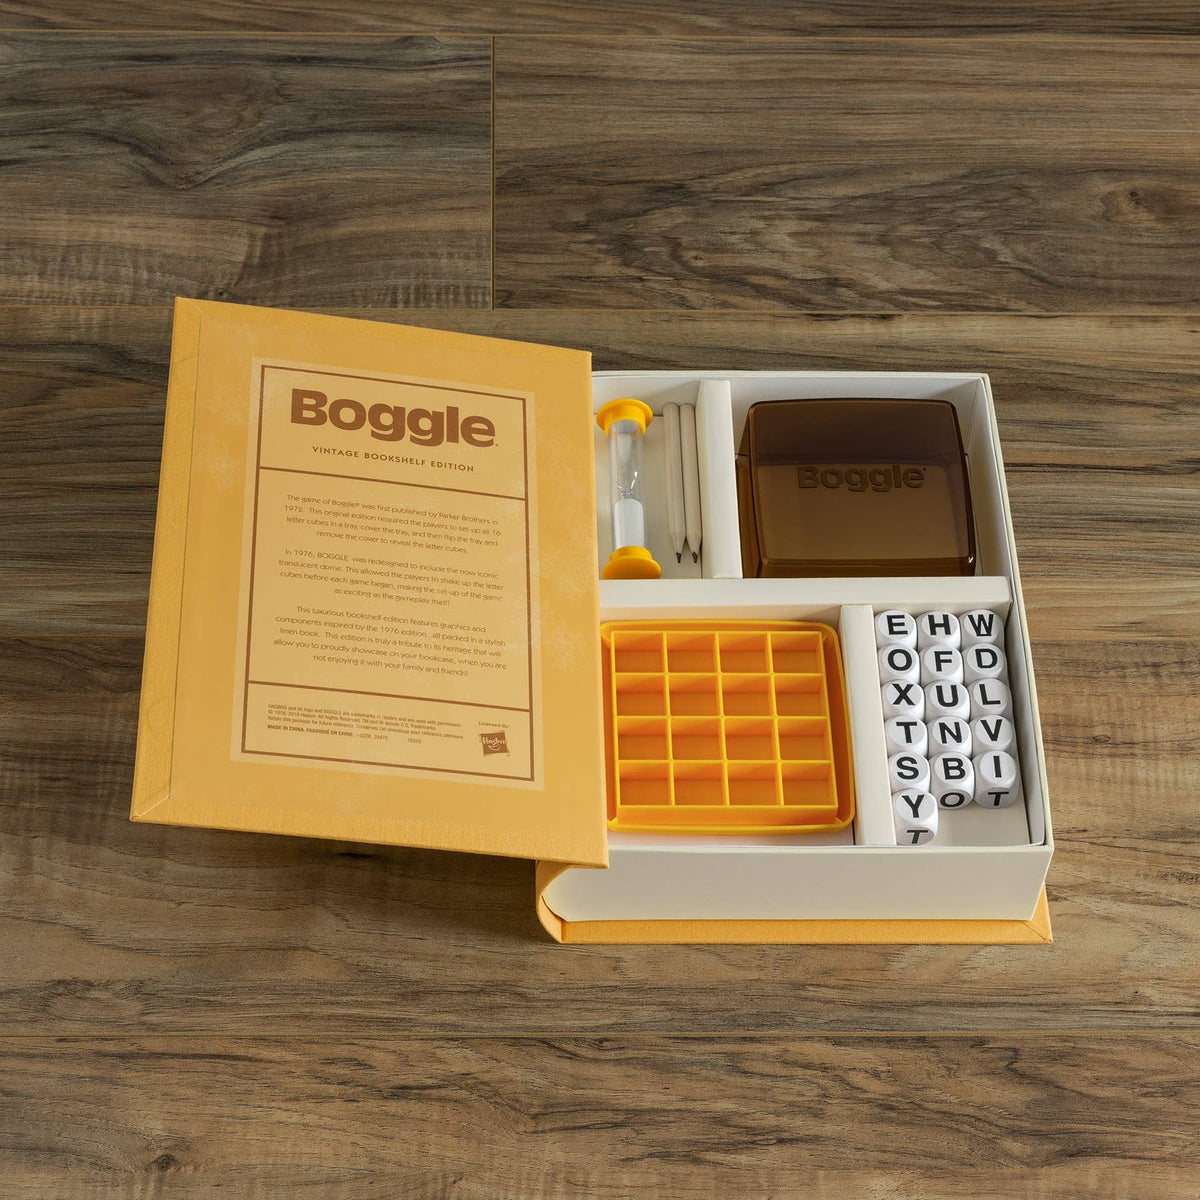 Vintage Bookshelf Edition: Boggle-Games-Yellow Springs Toy Company